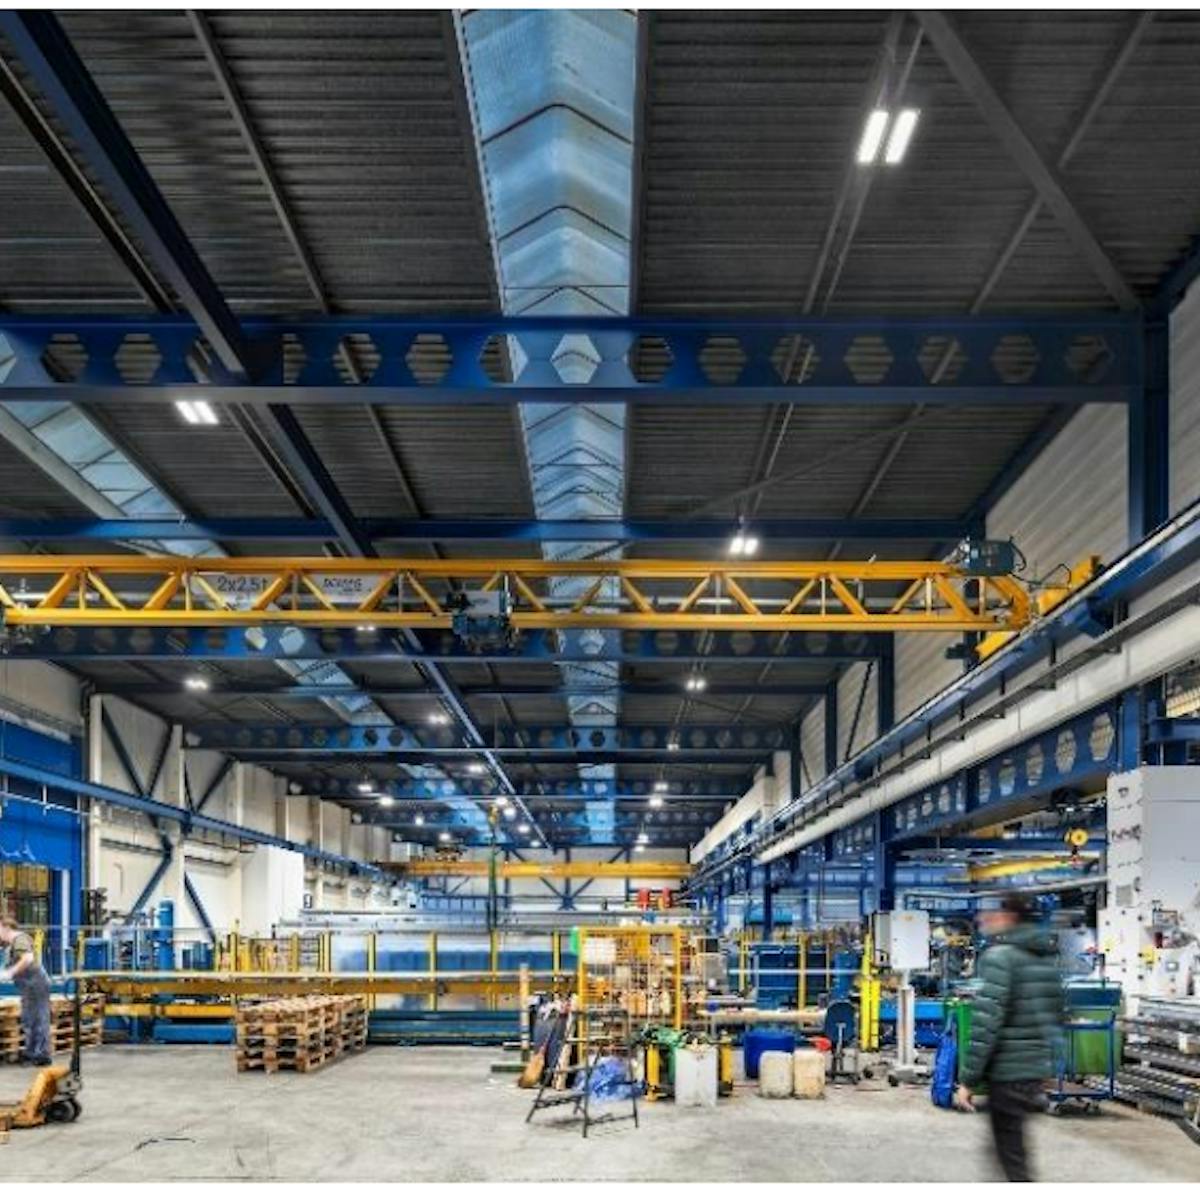 Forming AG worked with Zumtobel&rsquo;s lighting experts to replace the existing 400-watt sodium-vapor lamps in two large assembly halls with CRAFT II plus LED high-bay luminaires.